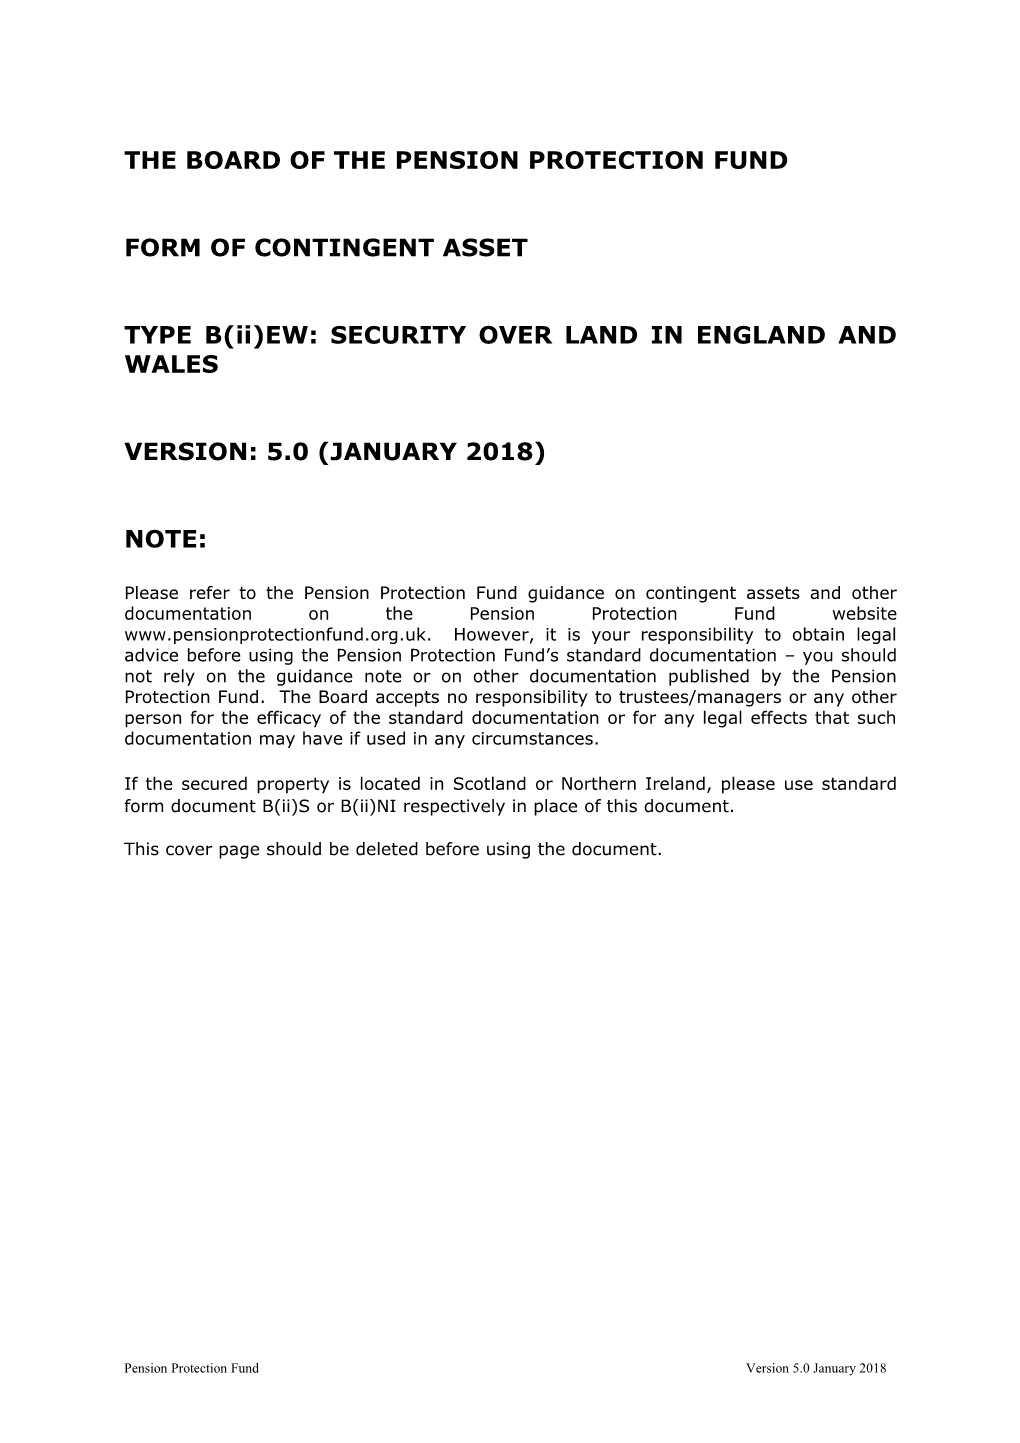 Form of Type B(Ii)EW Contingent Asset - Security Over Real Estate (England and Wales)